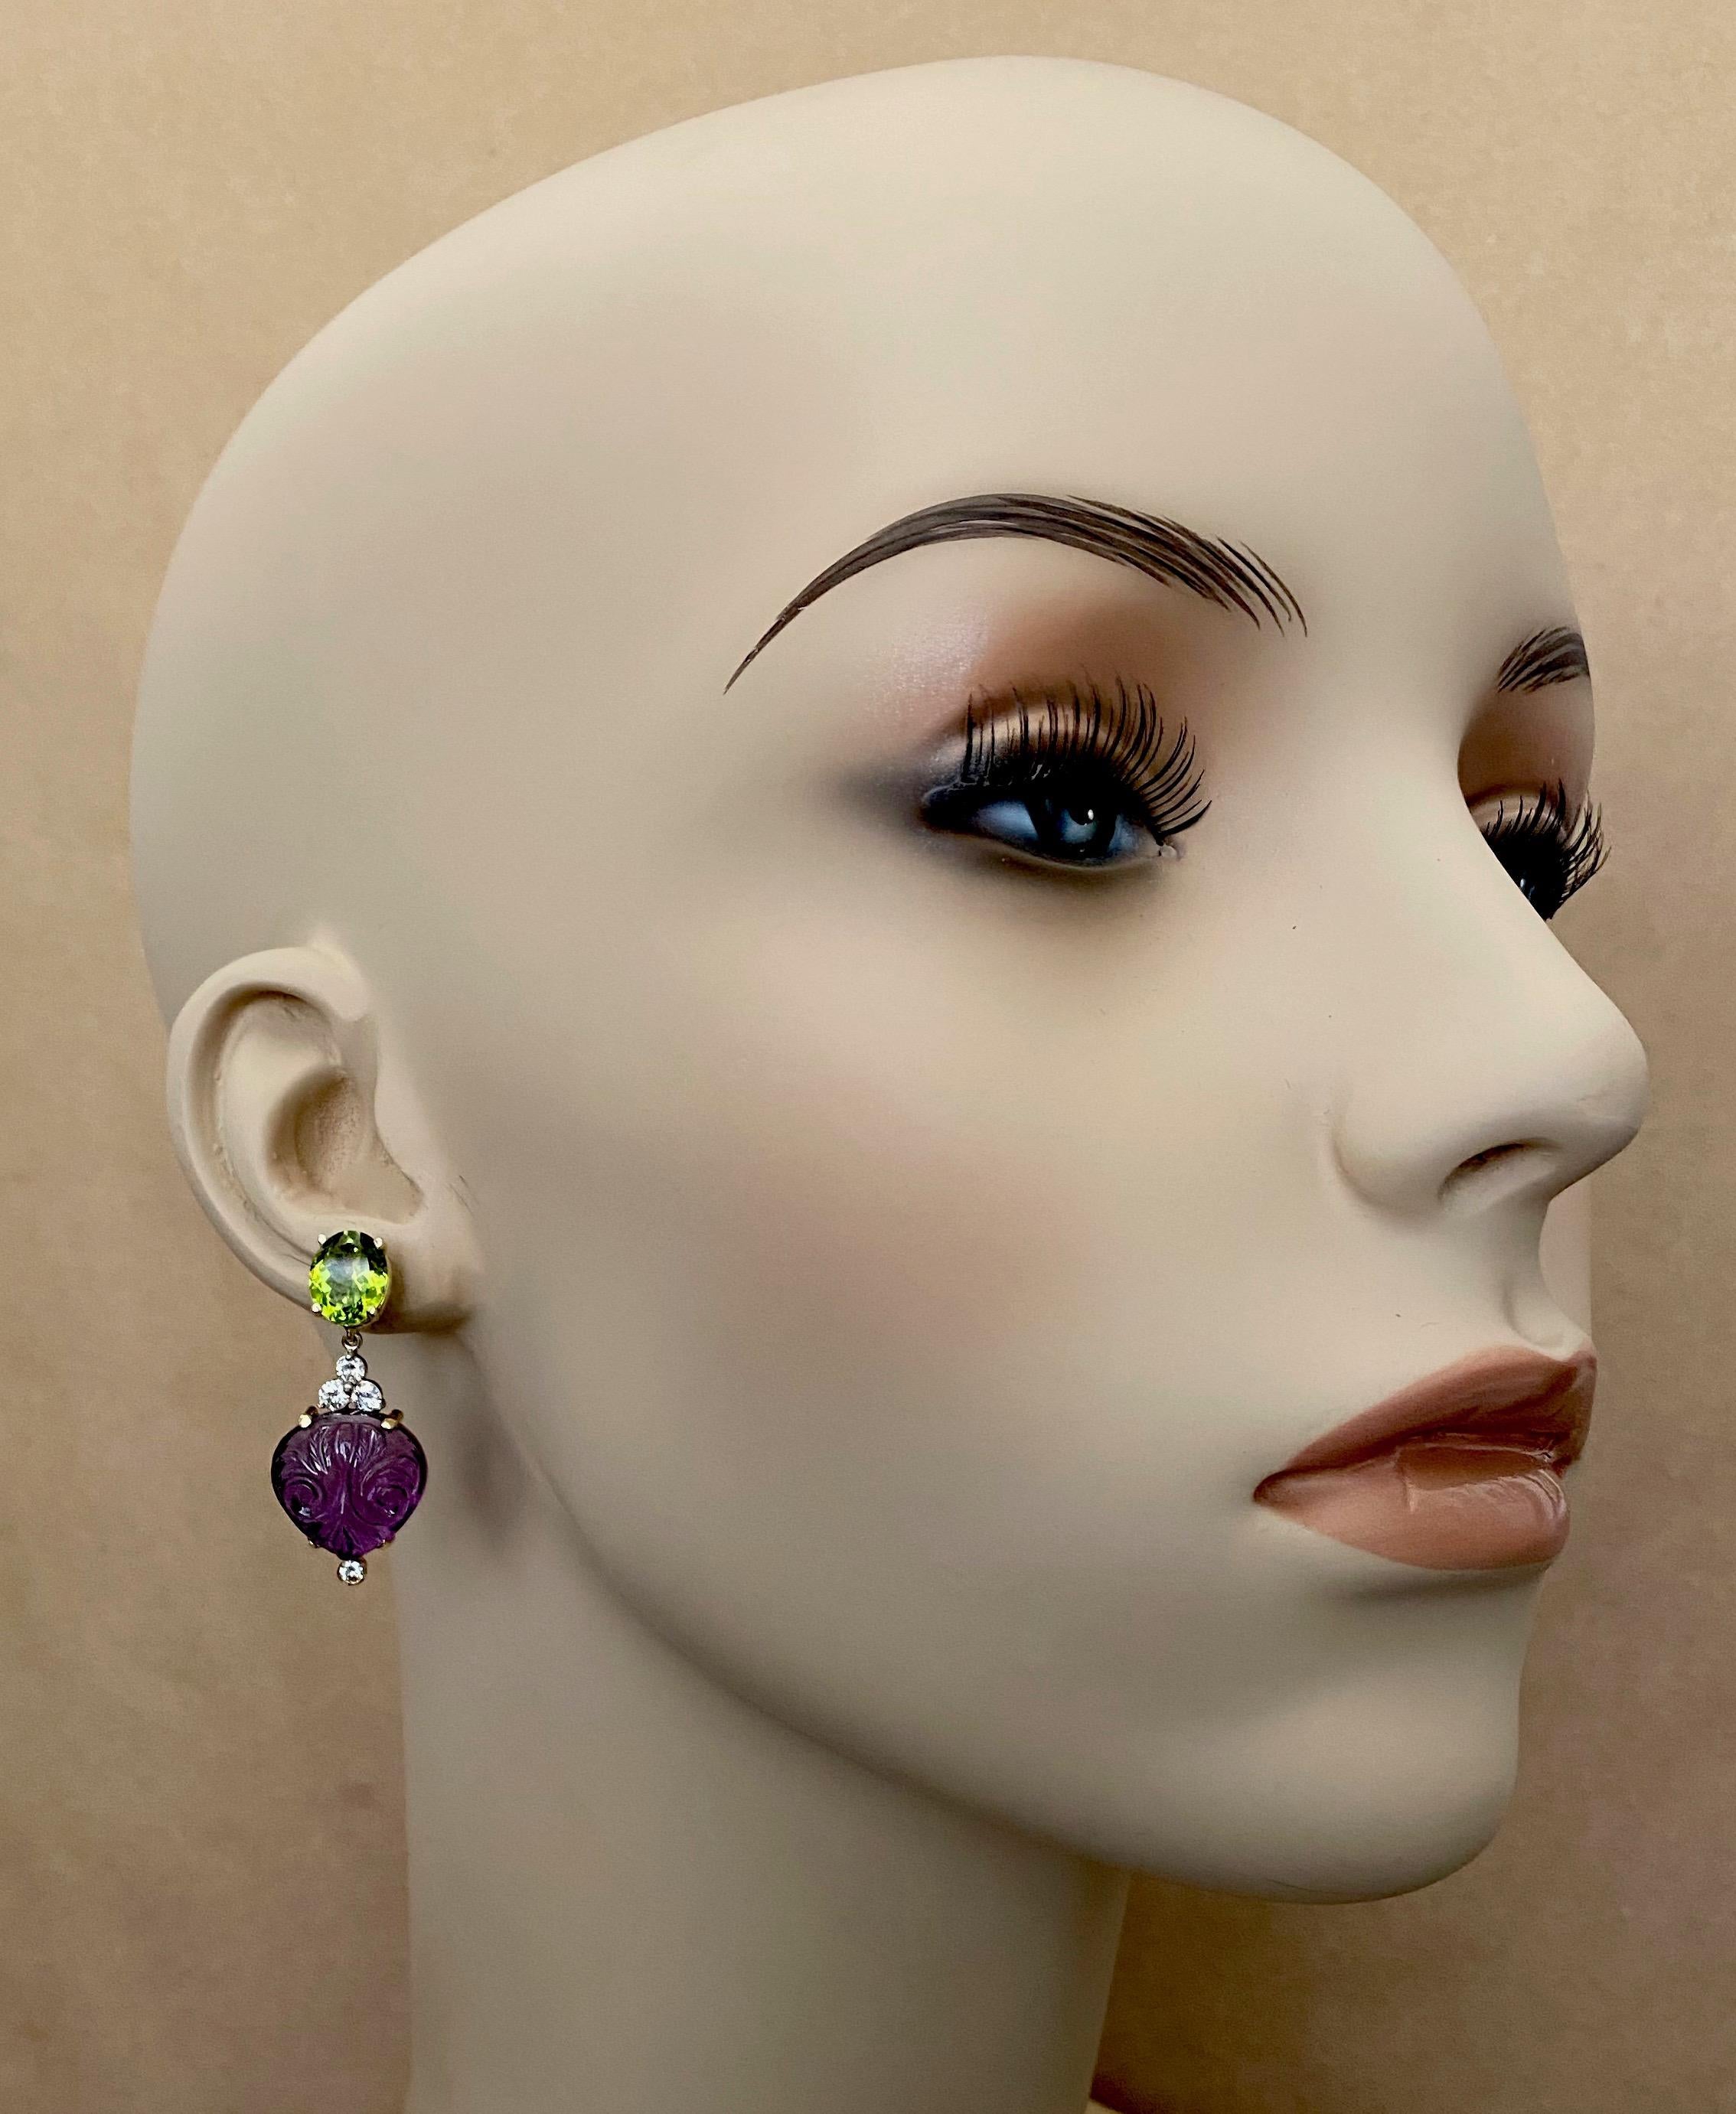 Drop shaped amethyst, carved in the classic Indian style are featured in these opulent dangle earrings.  The gems are rich purple and are expertly carved and finished.  The amethyst are complimented by oval cut peridot which are bright green, and